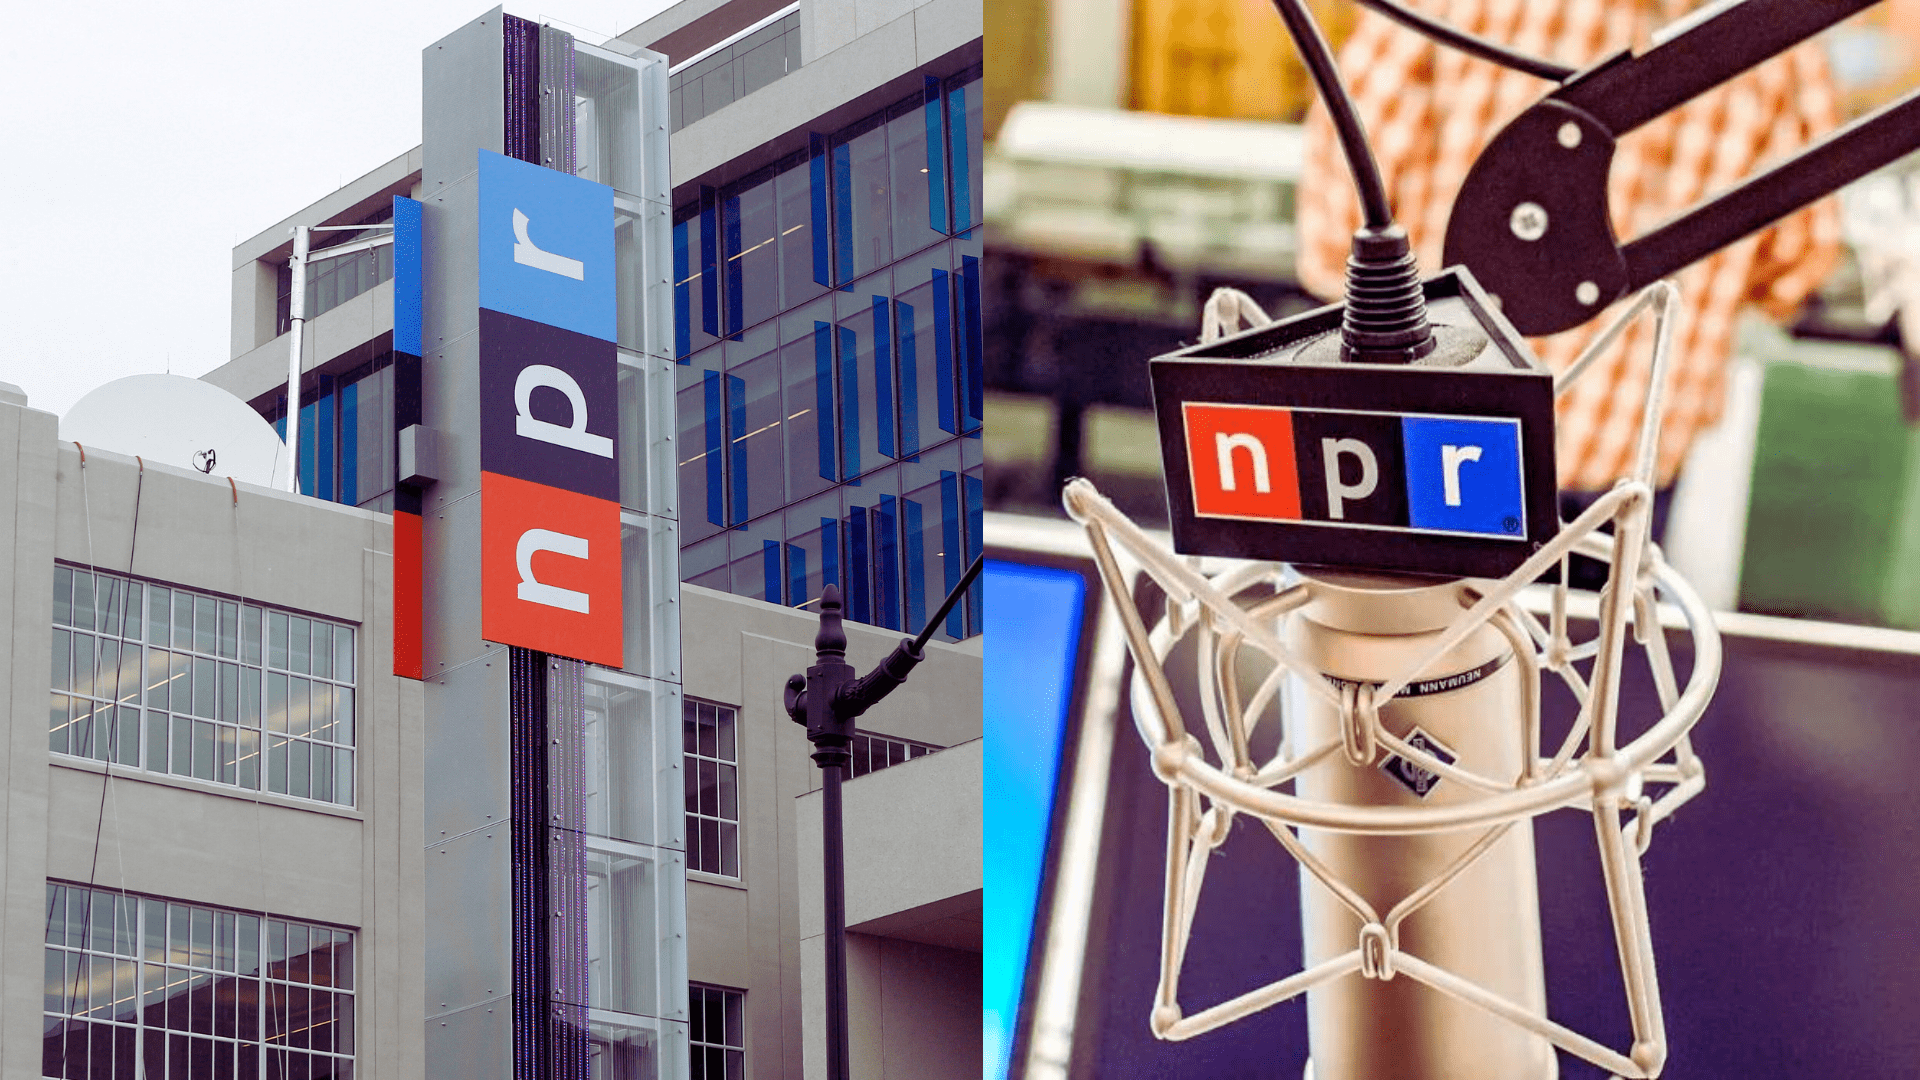 What is NPR